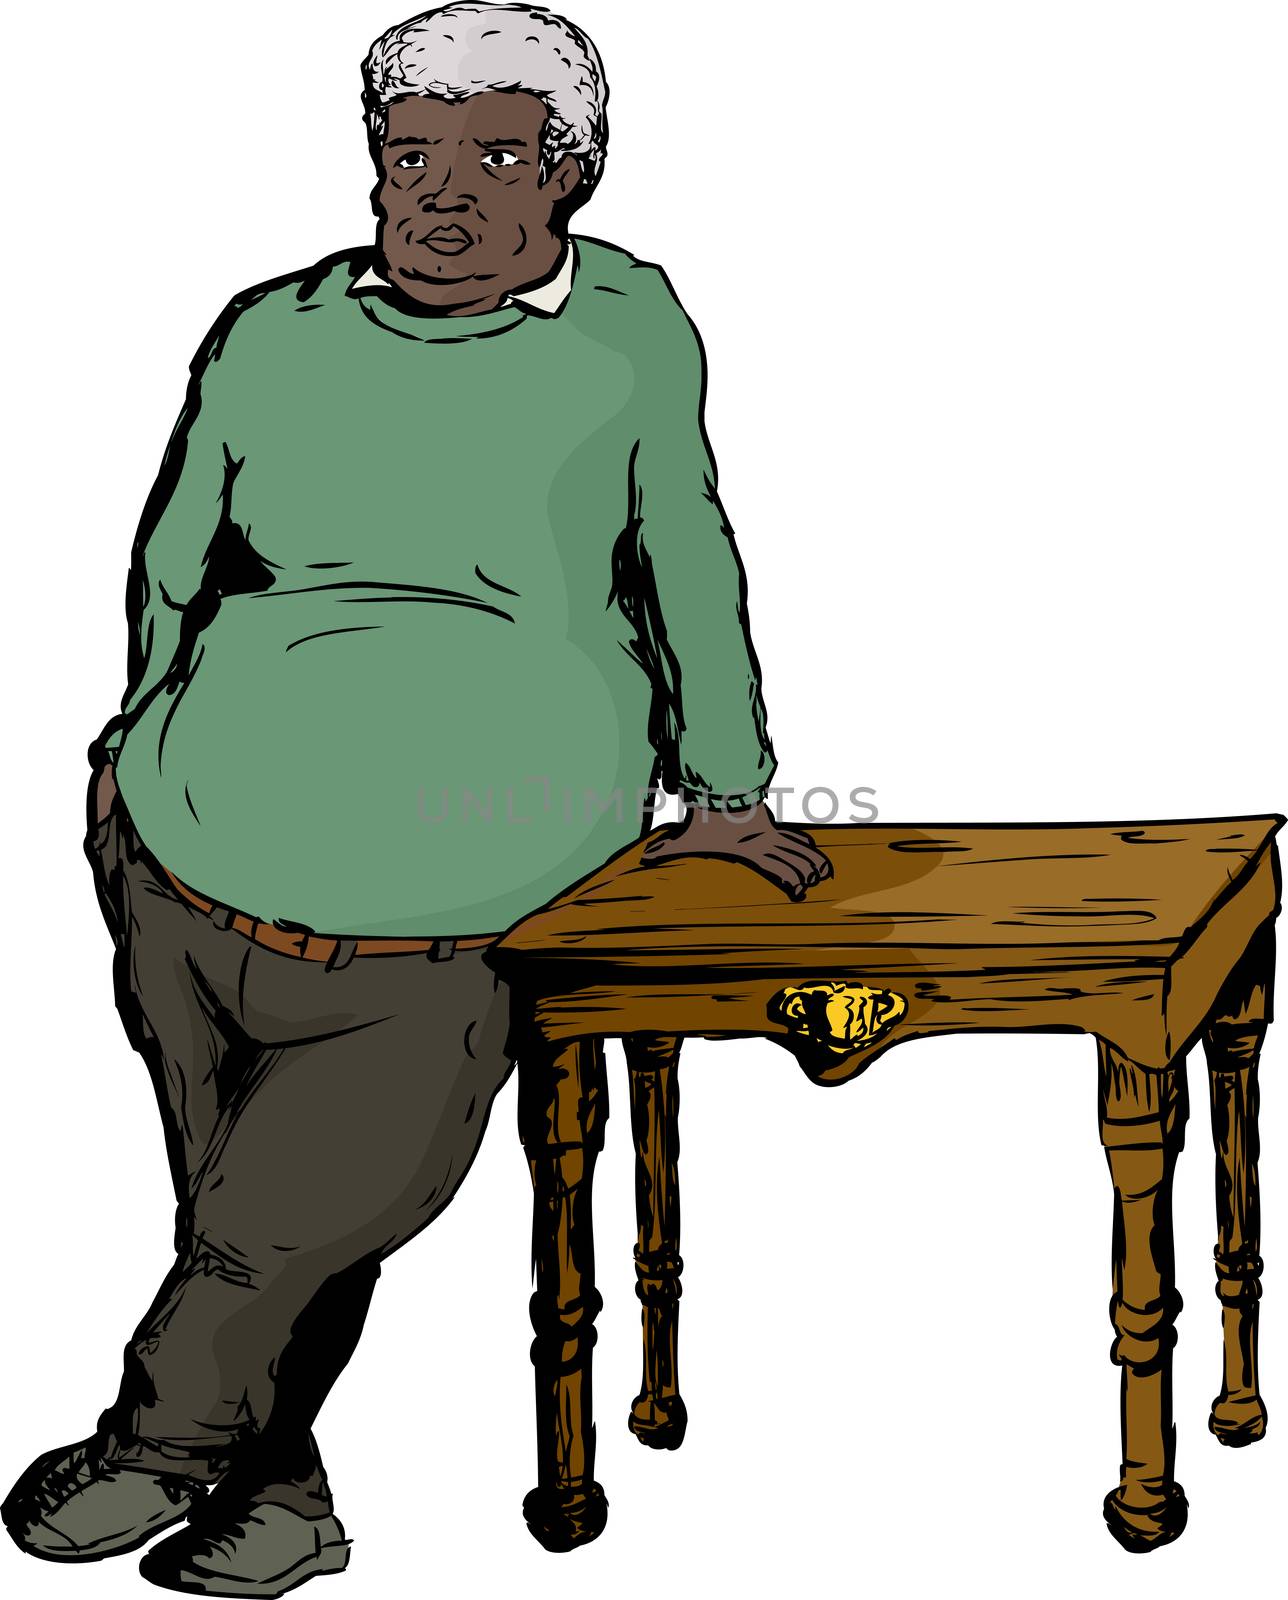 Mature Man in Green Leaning on Table by TheBlackRhino